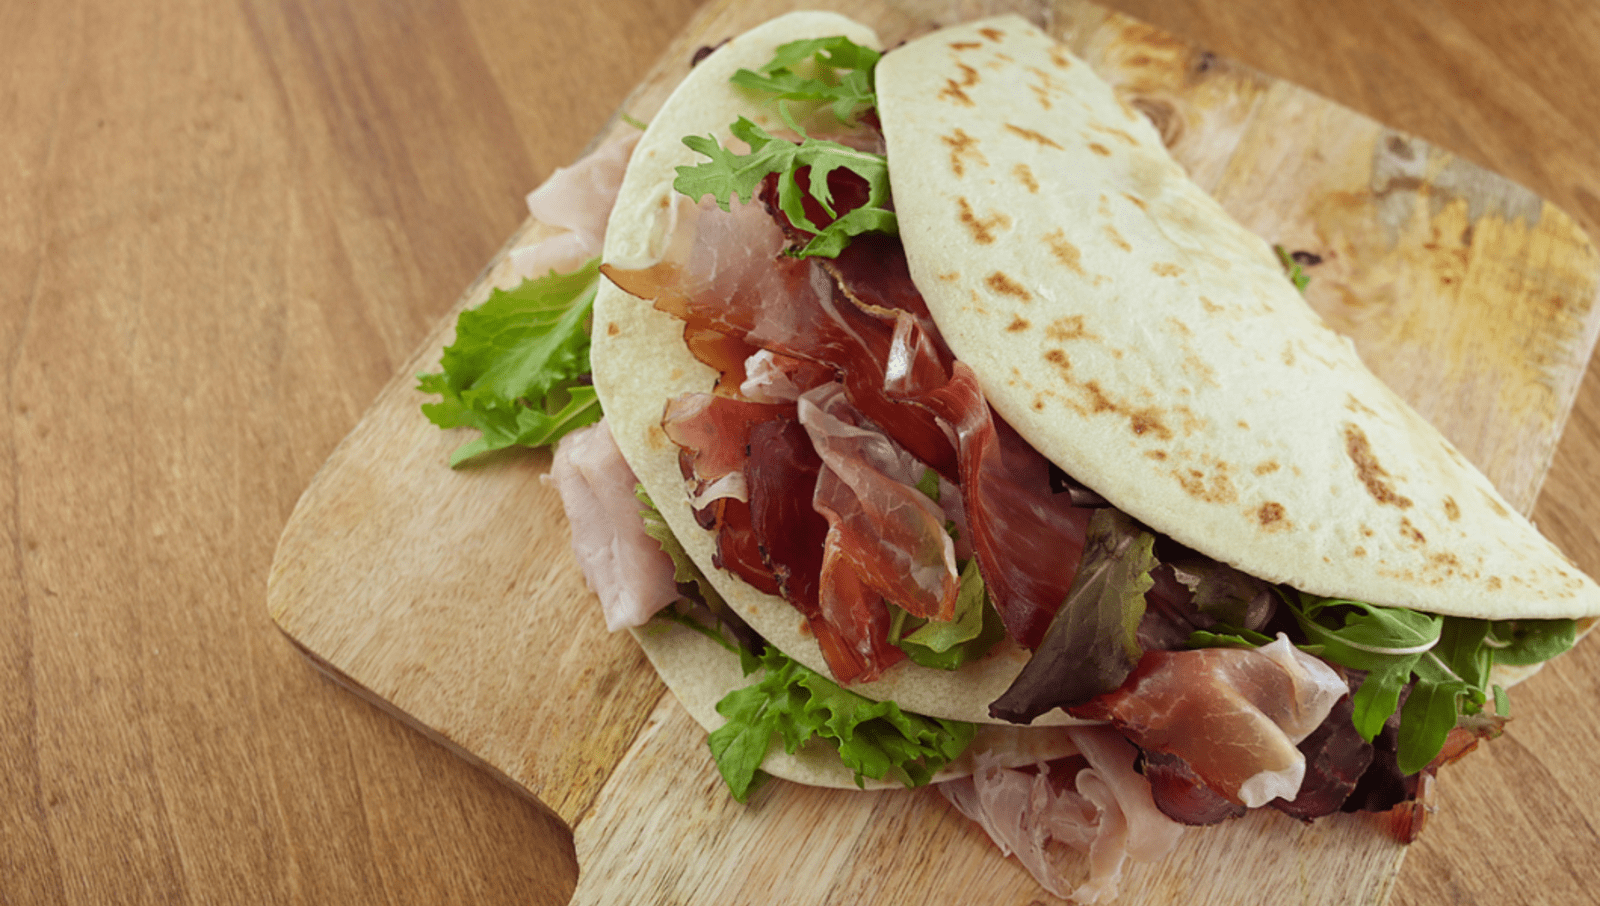 flatbread folded in half and filled with thinly sliced meat and lettuce